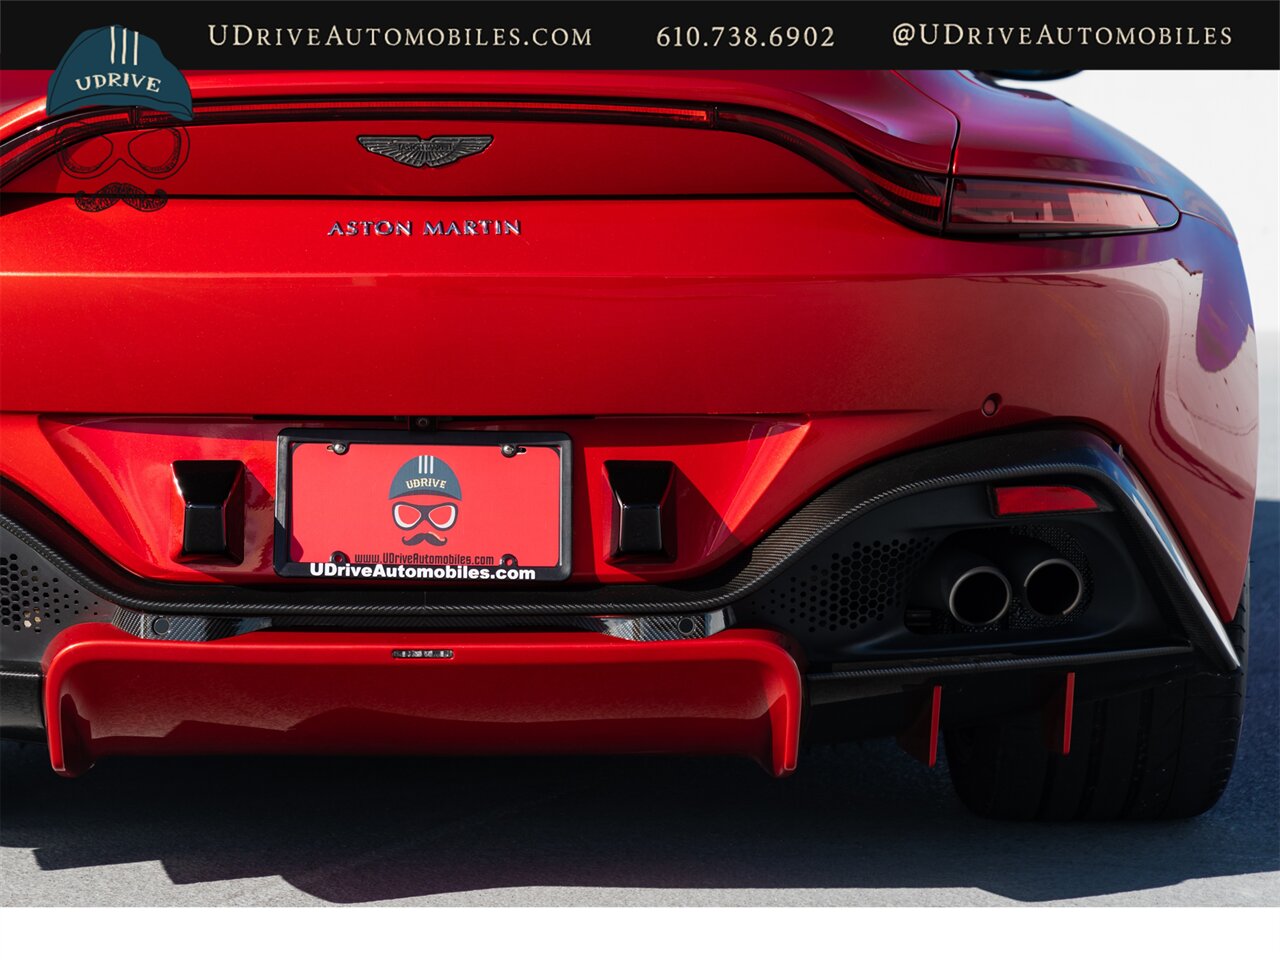 2019 Aston Martin Vantage  Incredibly Spec Rare Q Exclusive Fiamma Red $222k MSRP 1 of a Kind CPO - Photo 23 - West Chester, PA 19382